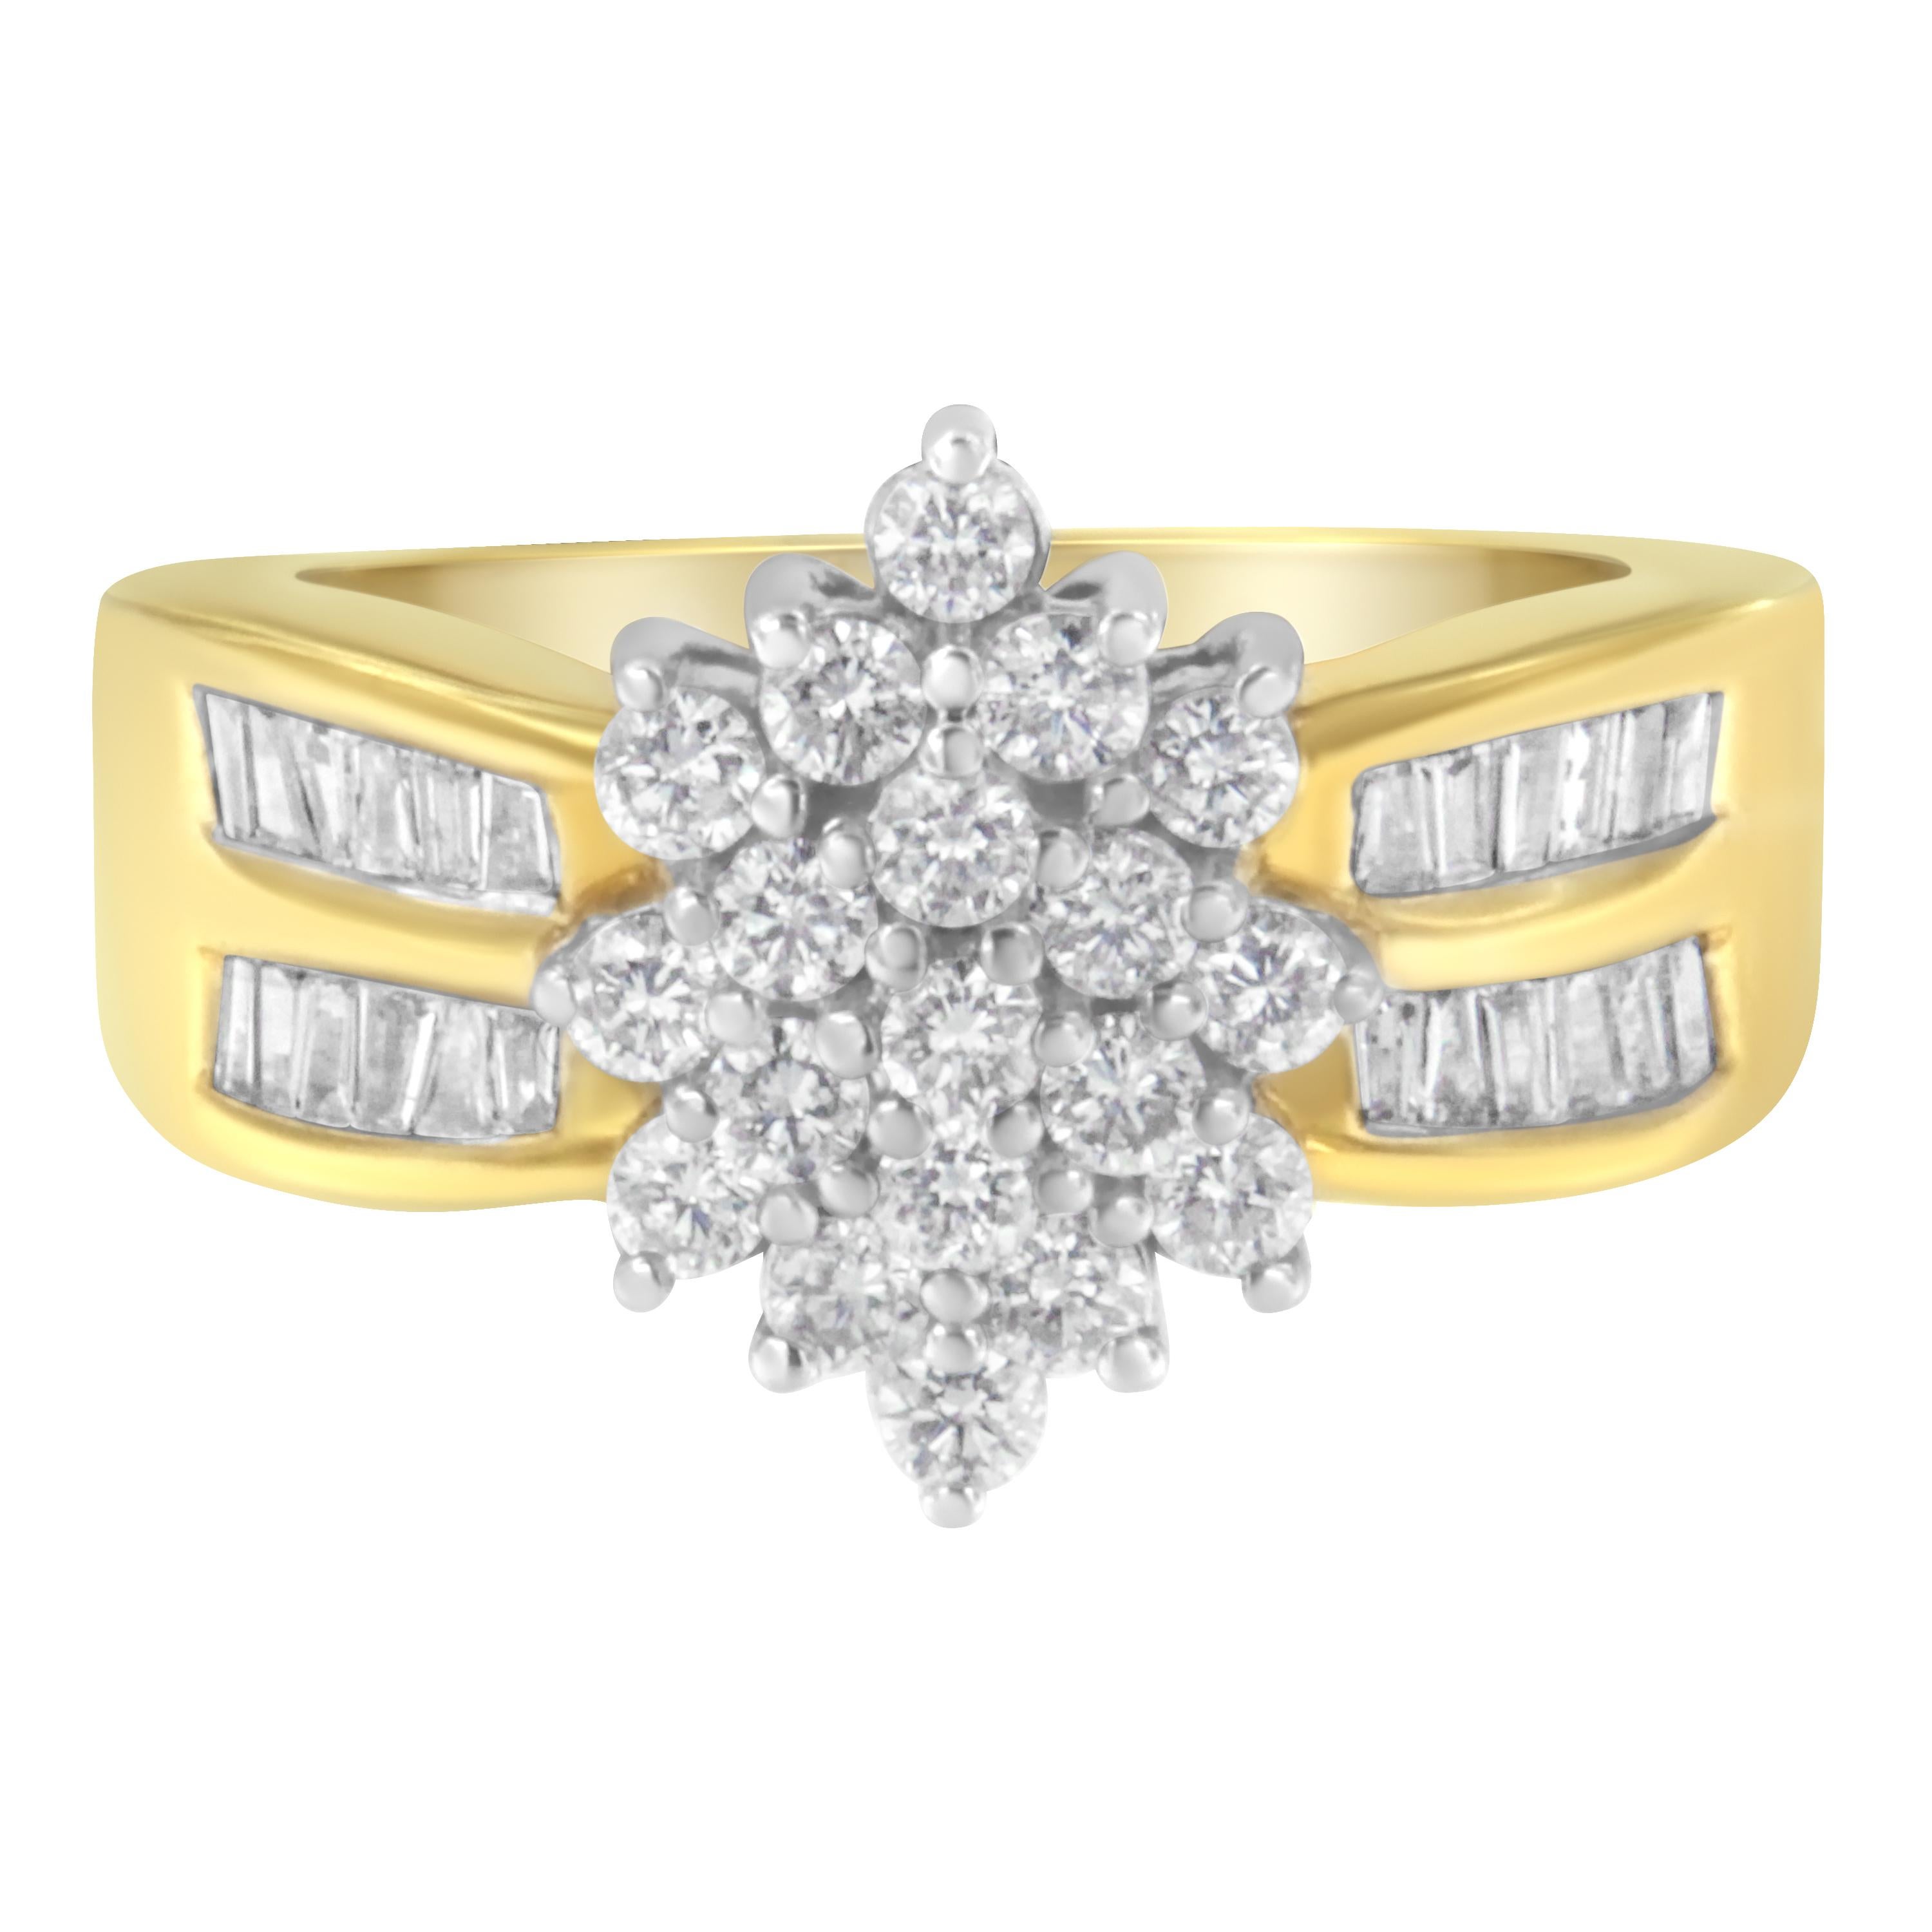 10K Yellow Gold 1.0 Carat Marquise Composite Diamond Cluster Cocktail Ring